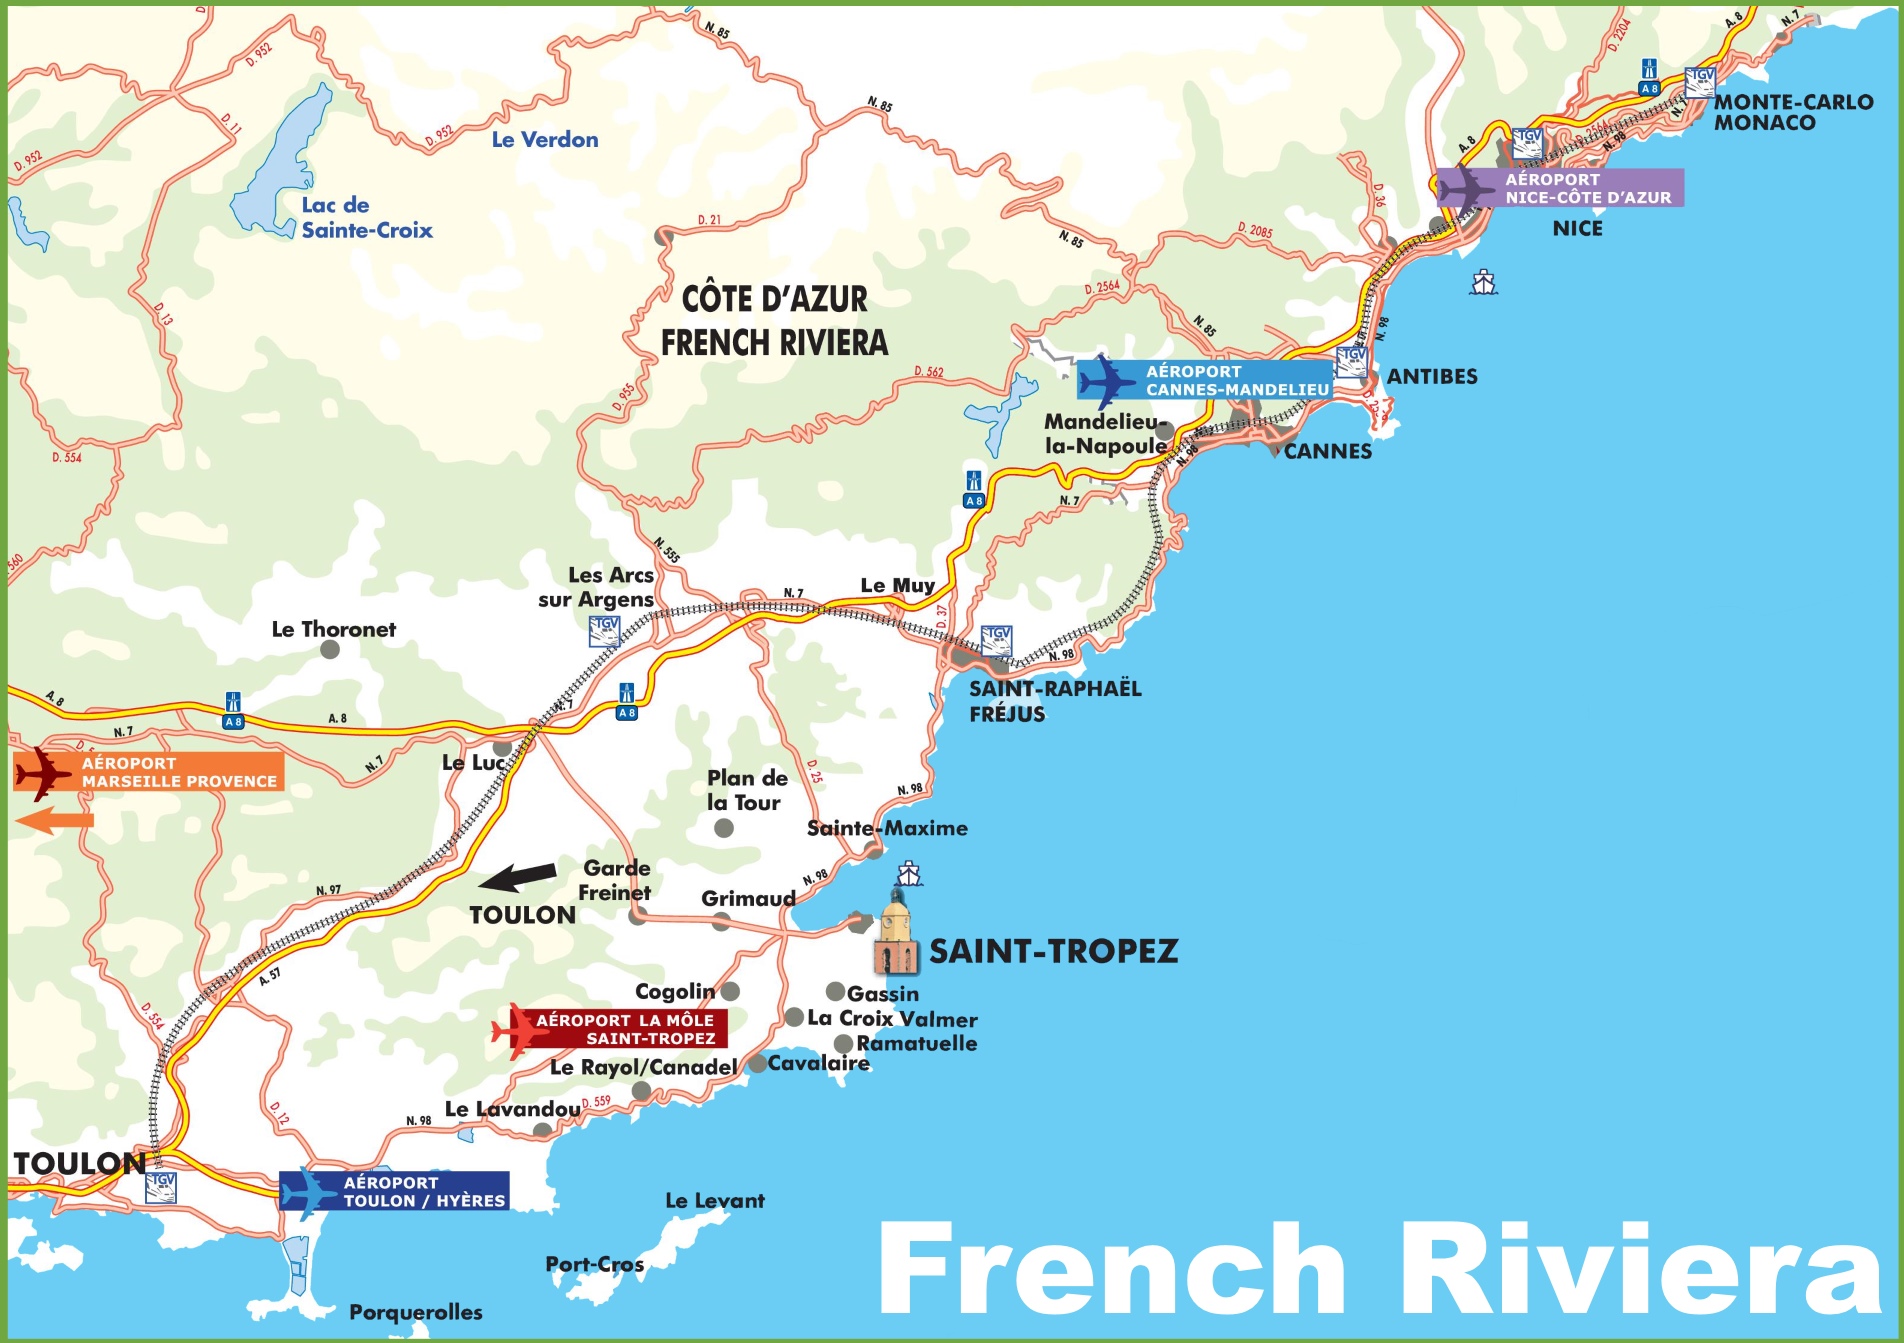 Map of French Riviera with cities and towns ﻿